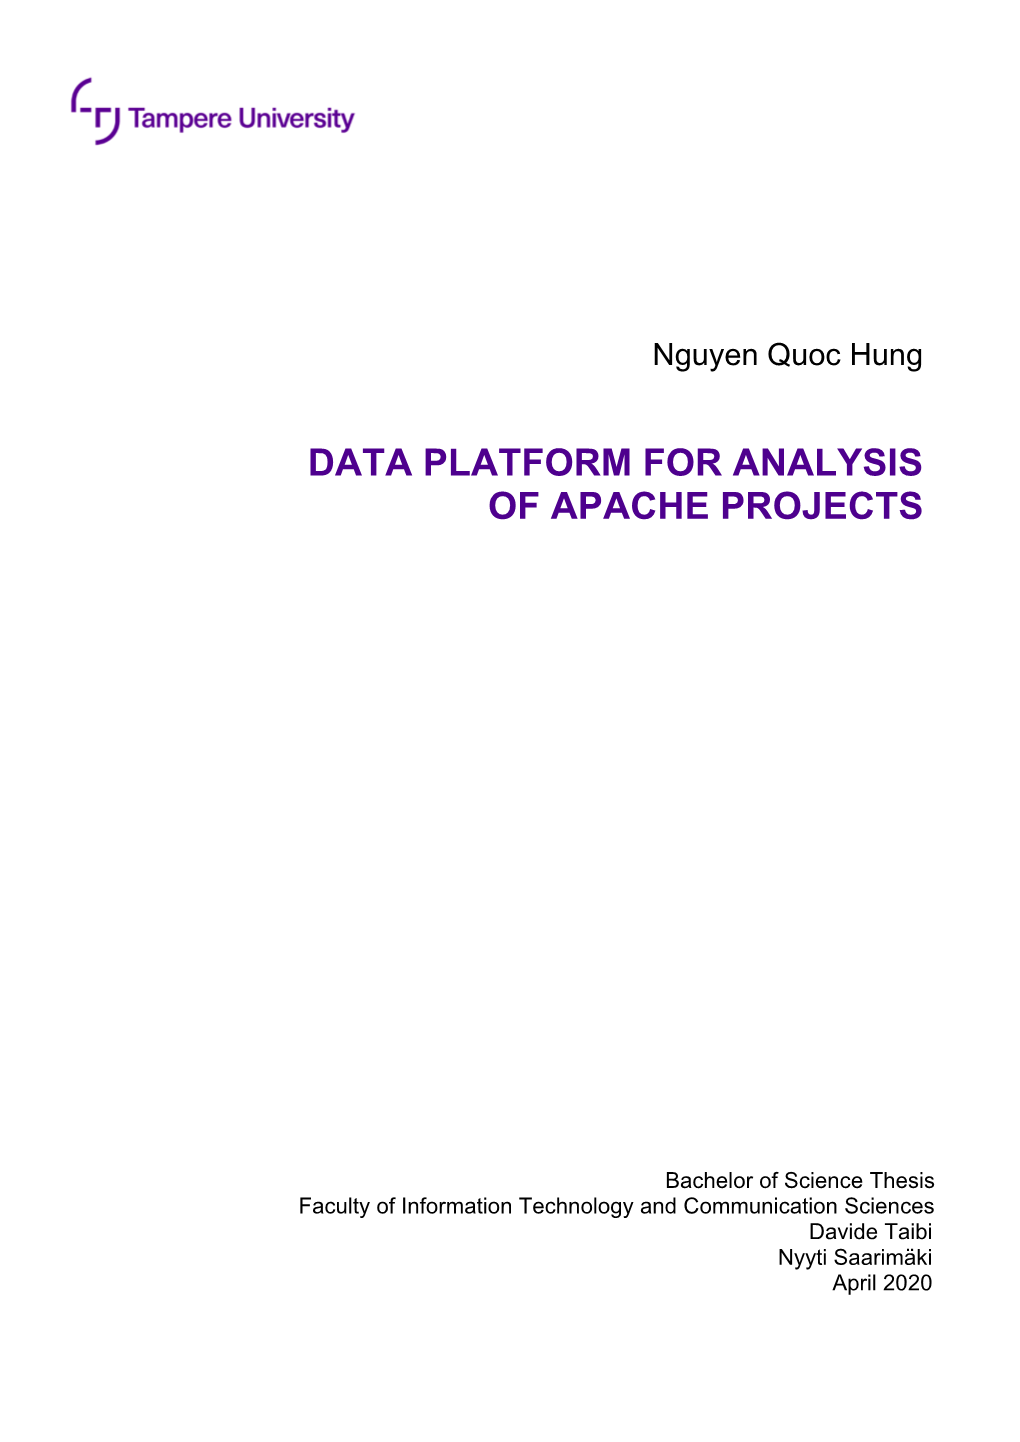 Data Platform for Analysis of Apache Projects